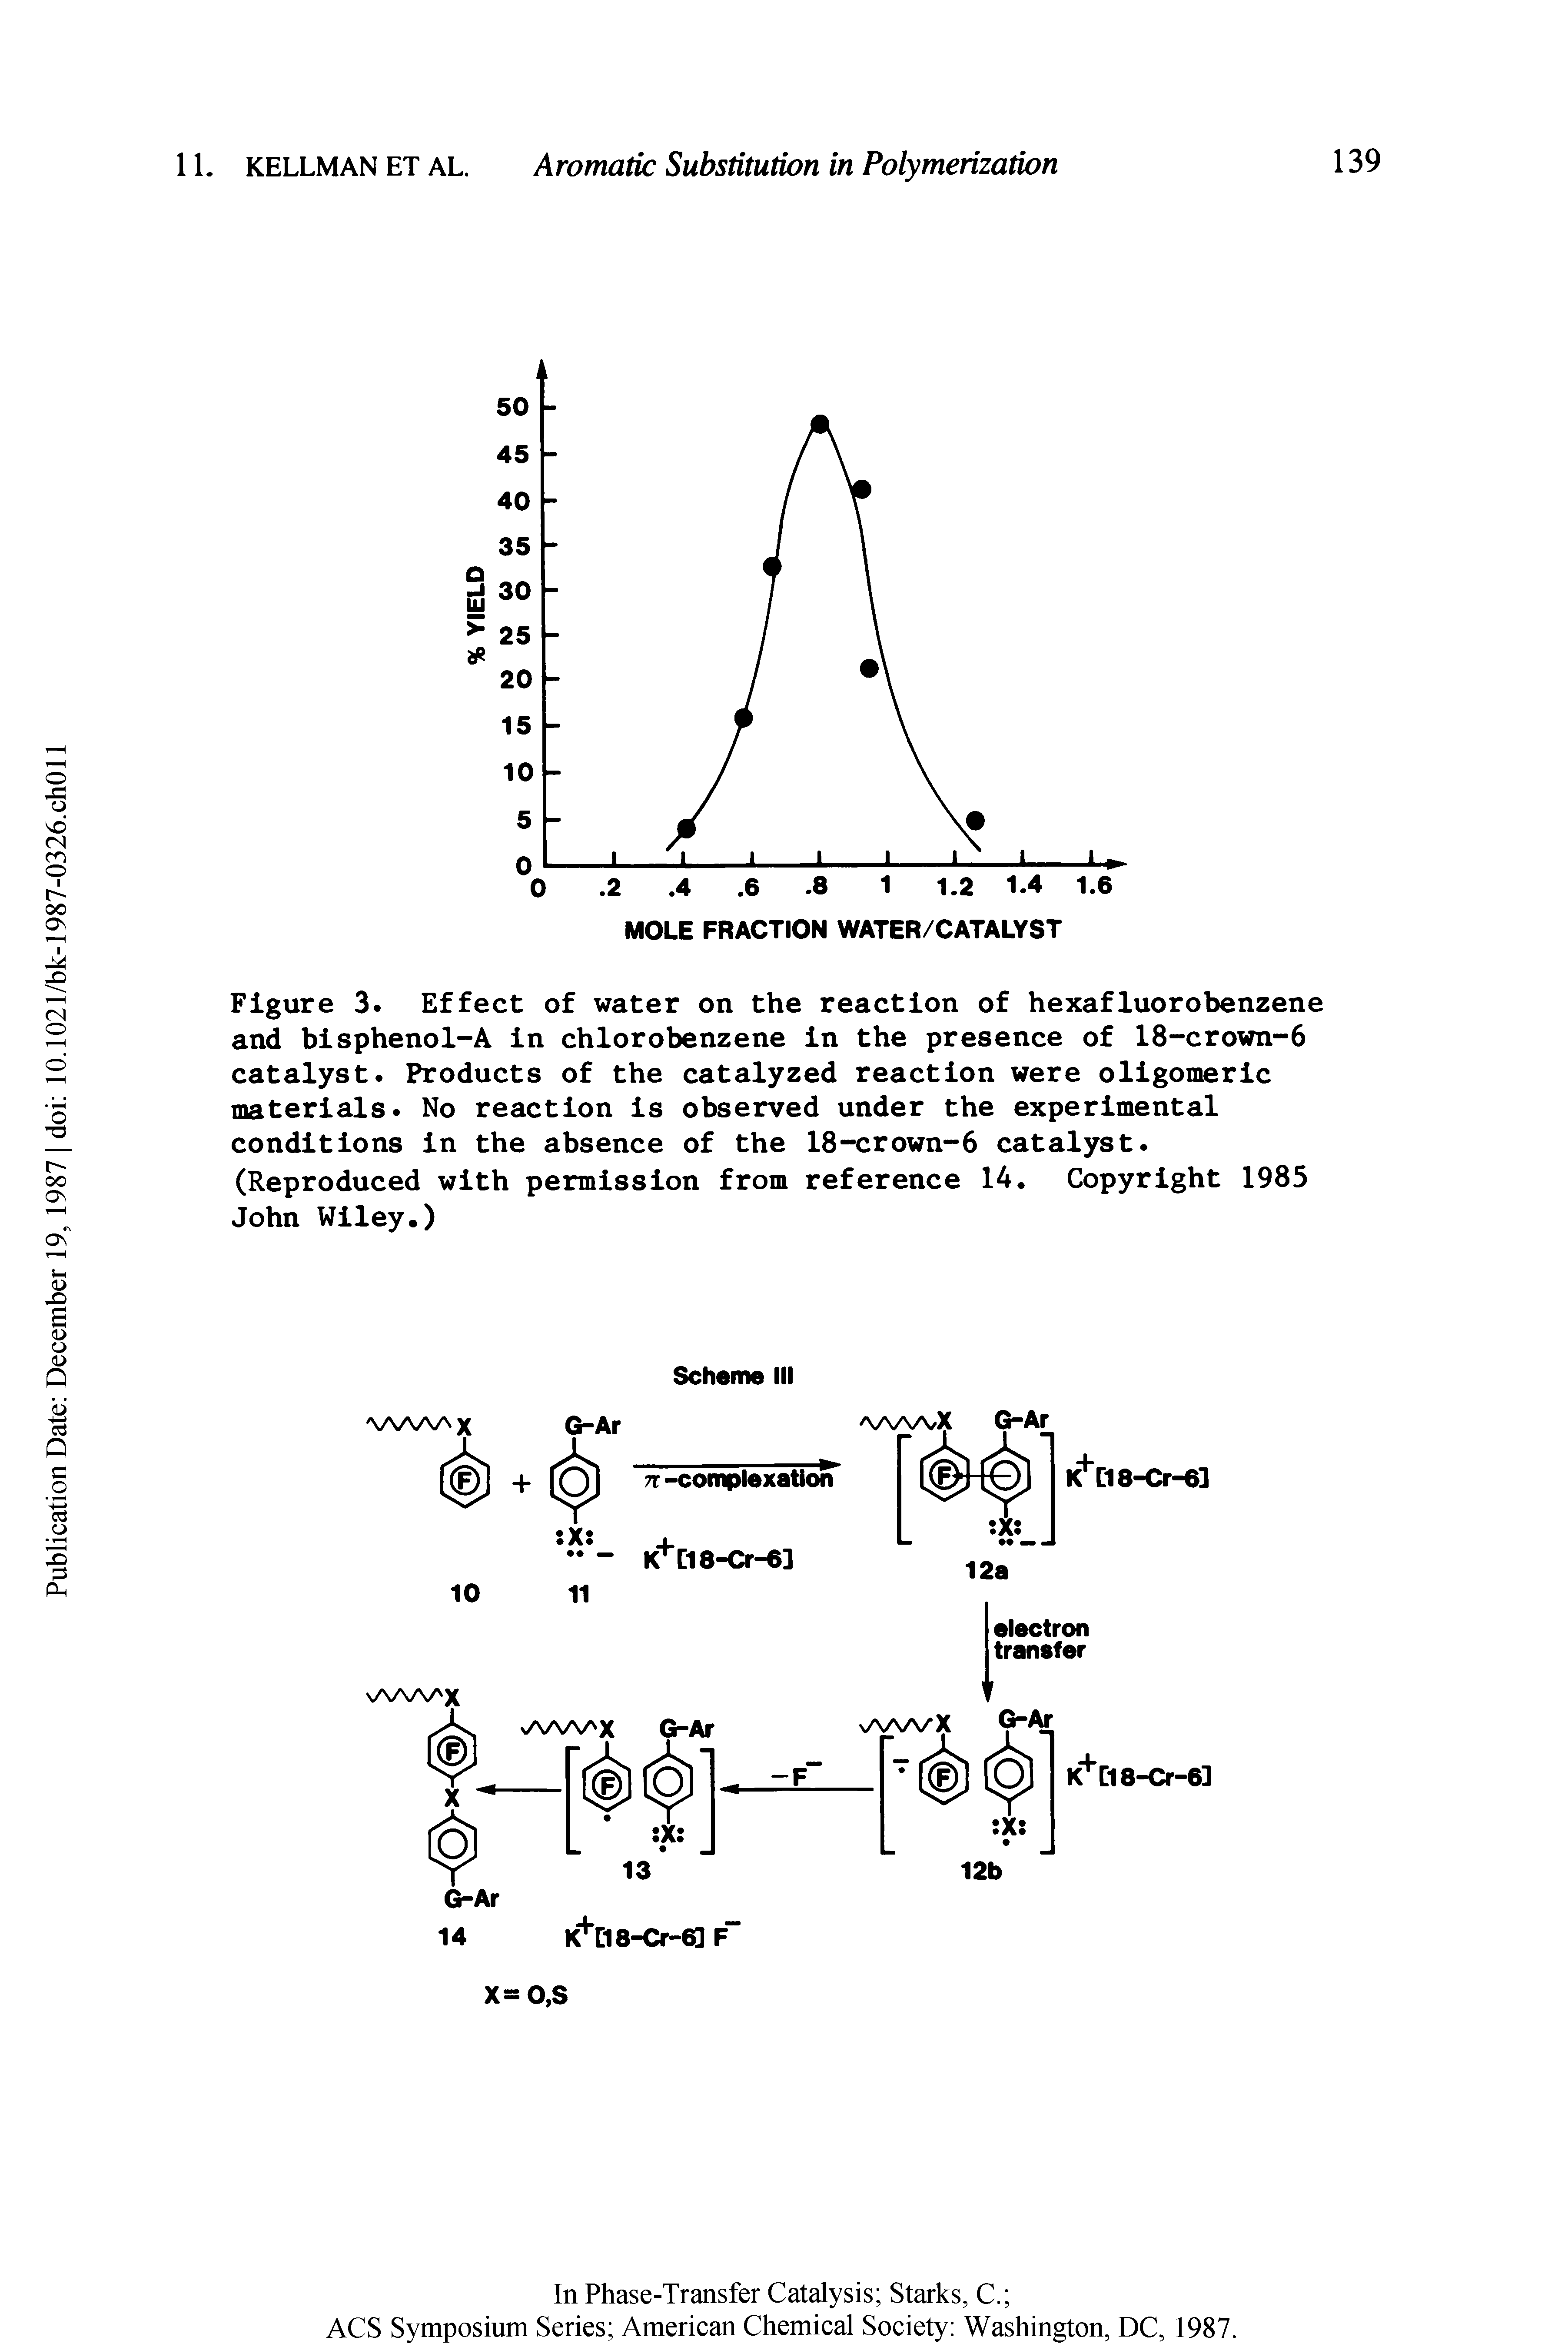 Figure 3. Effect of water on the reaction of hexafluorobenzene and bisphenol-A in chlorobenzene in the presence of 18 crown-6 catalyst. Products of the catalyzed reaction were oligomeric materials. No reaction is observed under the experimental conditions in the absence of the 18-crown--6 catalyst. (Reproduced with permission from reference 14, Copyright 1985 John Wiley.)...